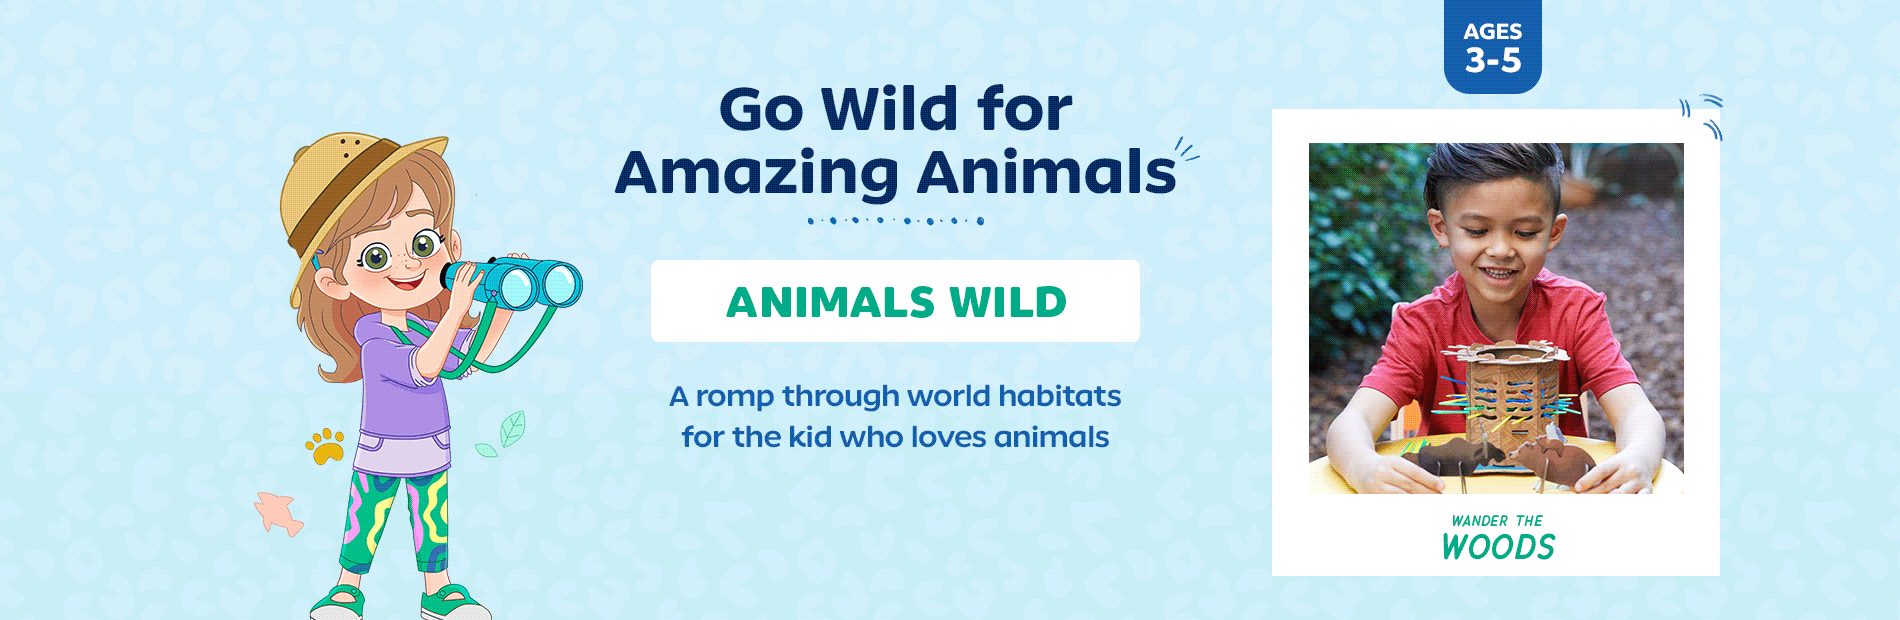 Go Wild for Amazing Animals ANIMALS WILD A romp through world habitats for the kid who loves animals